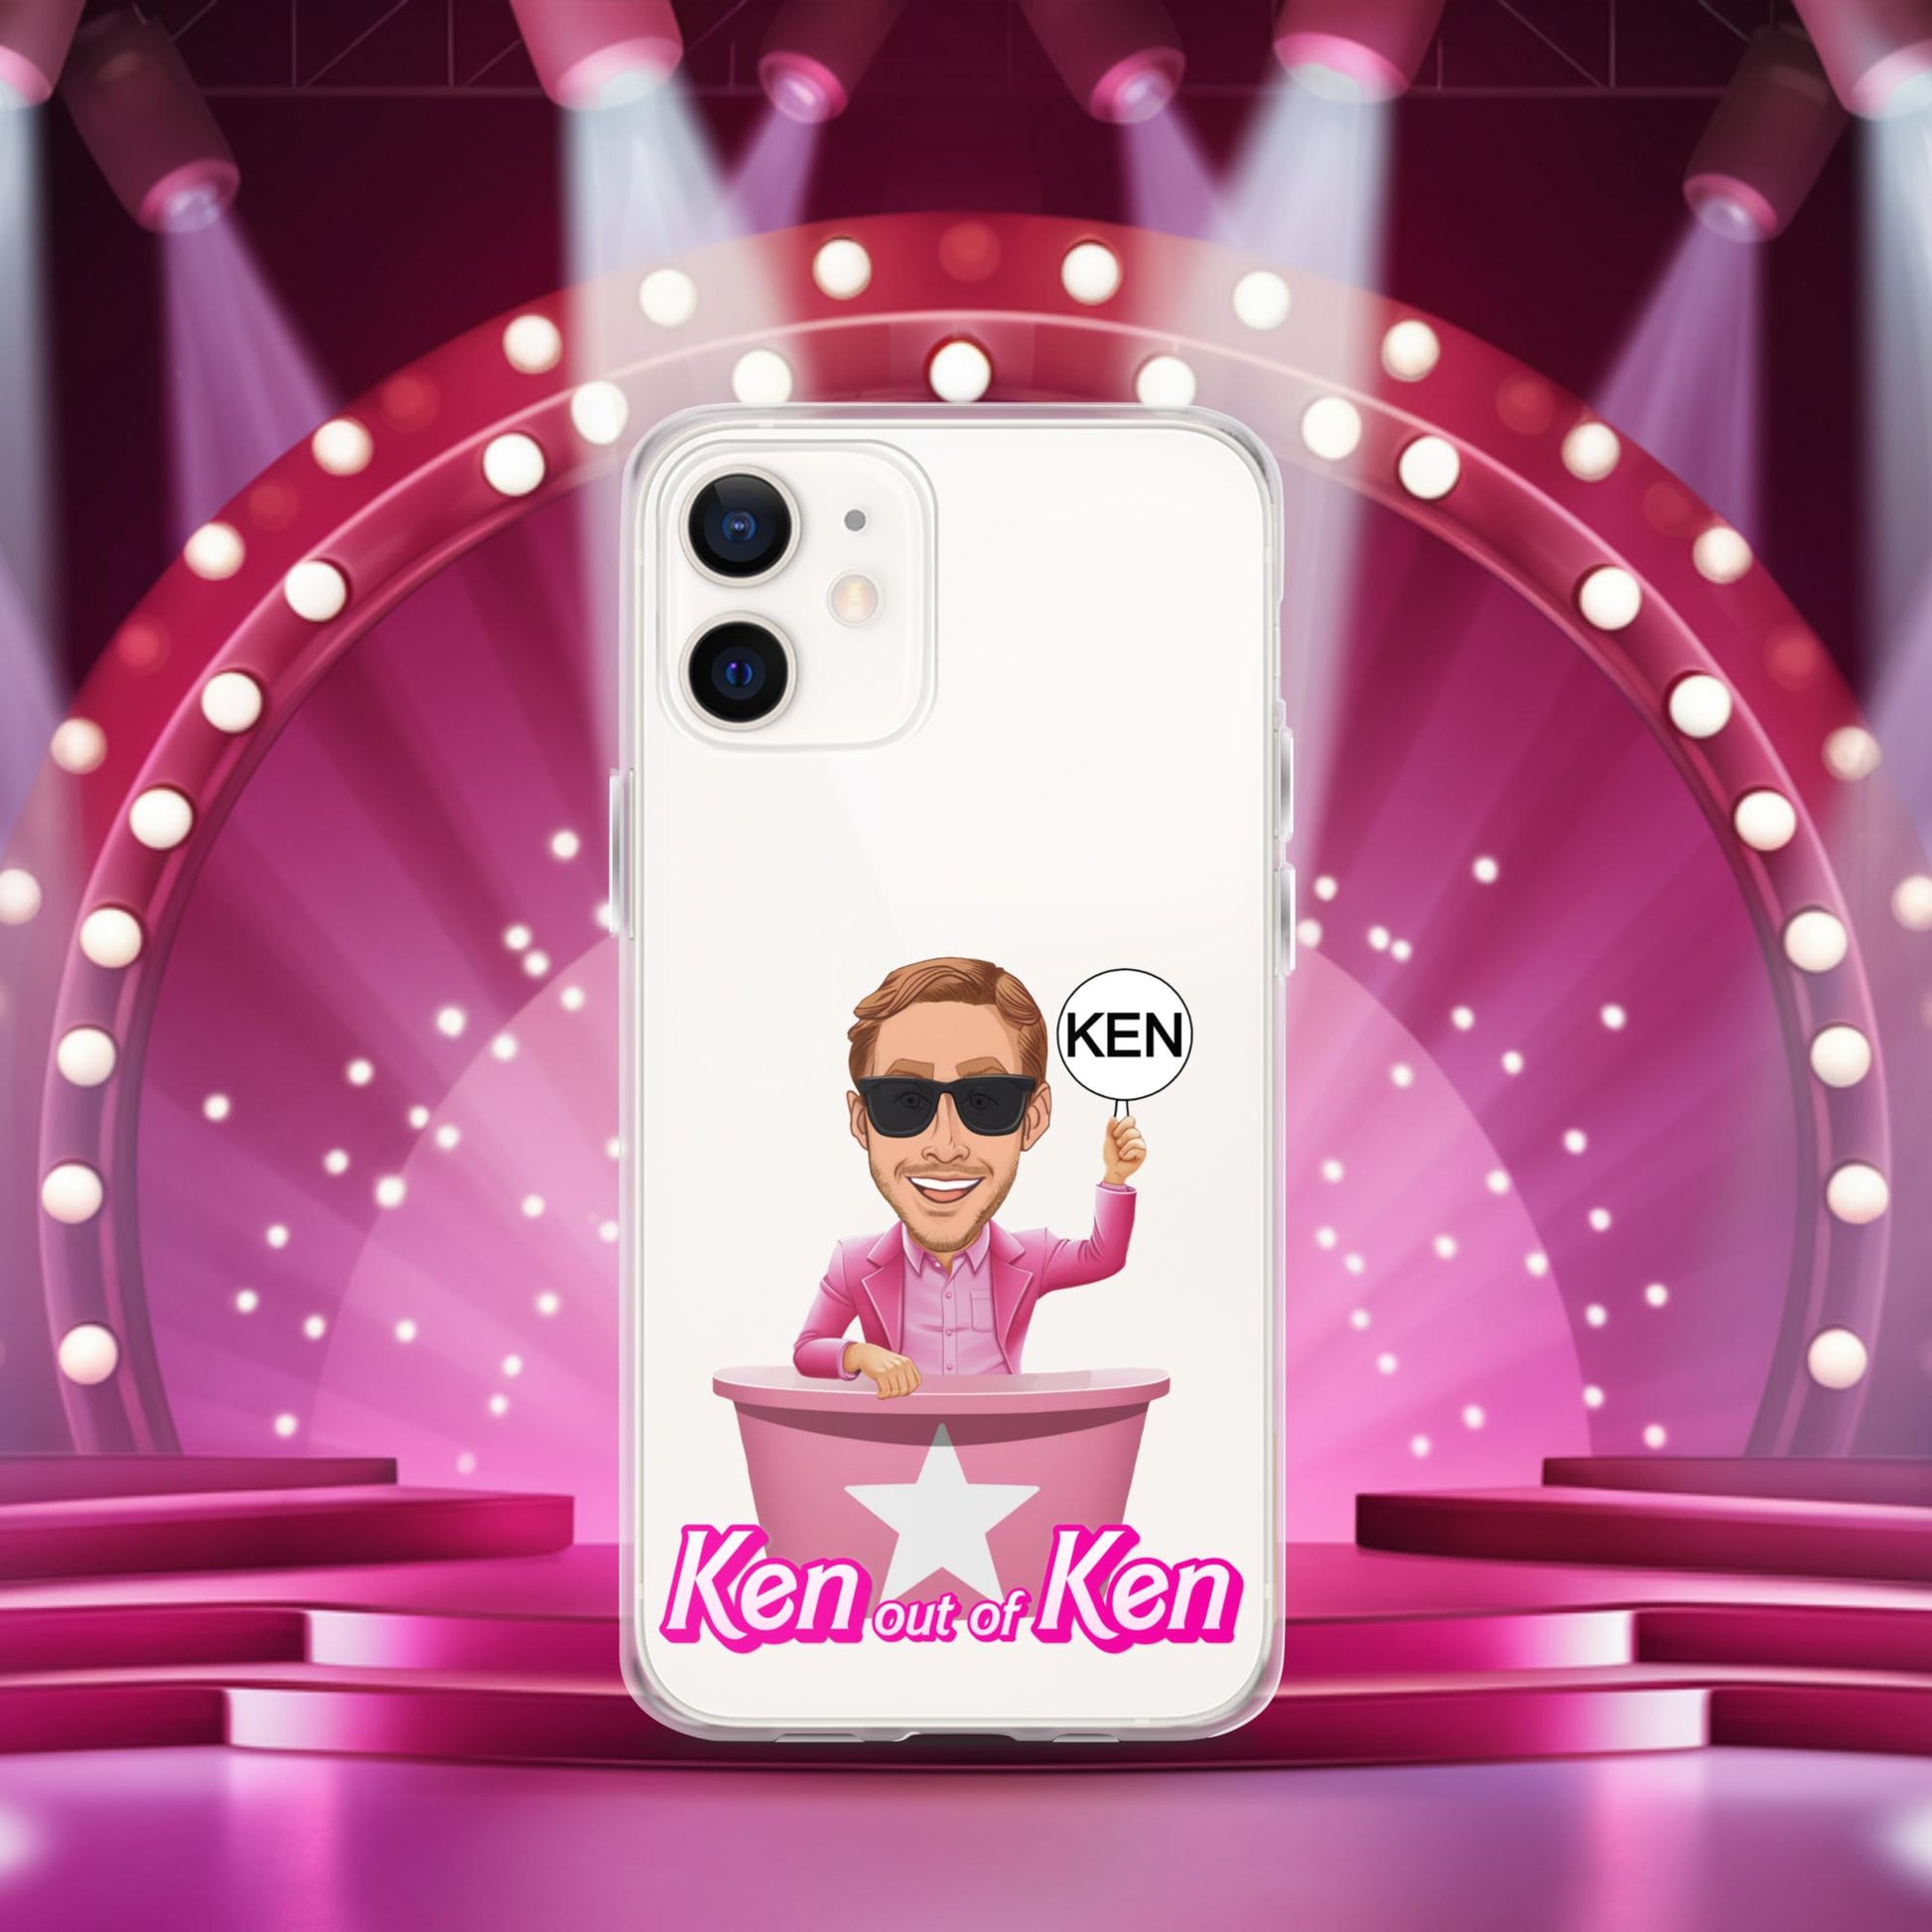 Ken out of Ken Ryan Gosling Barbie Movie Clear Case for iPhone Next Cult Brand